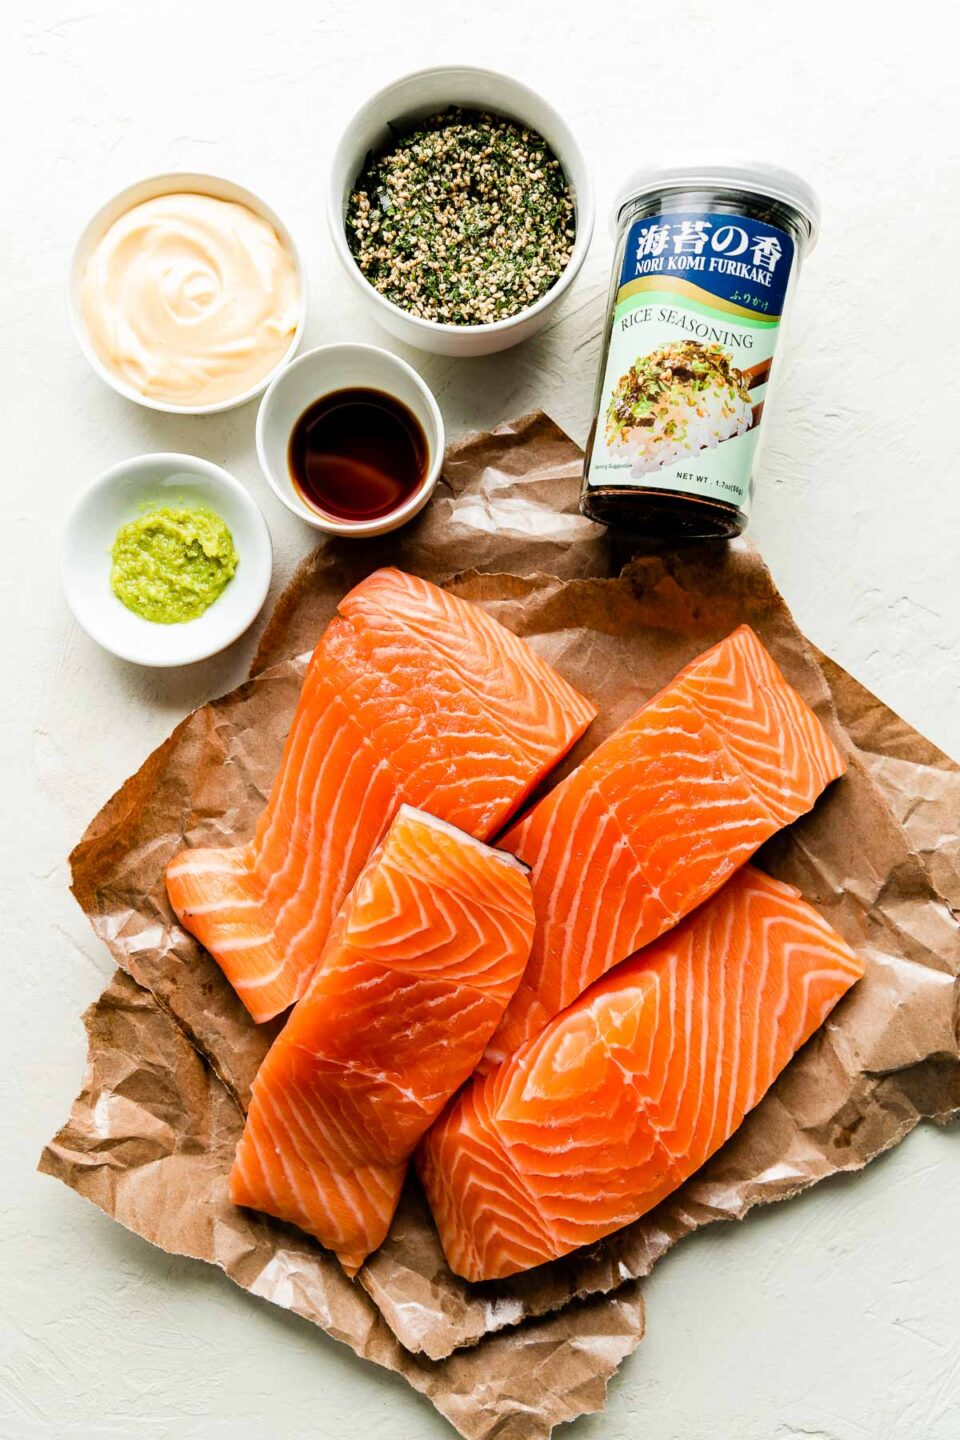 An overhead shot of ingredients sitting on a textured white surface: raw salmon fillets on brown butcher paper, a small tin of furikake, and small bowls of furikake, shoyu, wasabi & Kewpie mayonnaise.